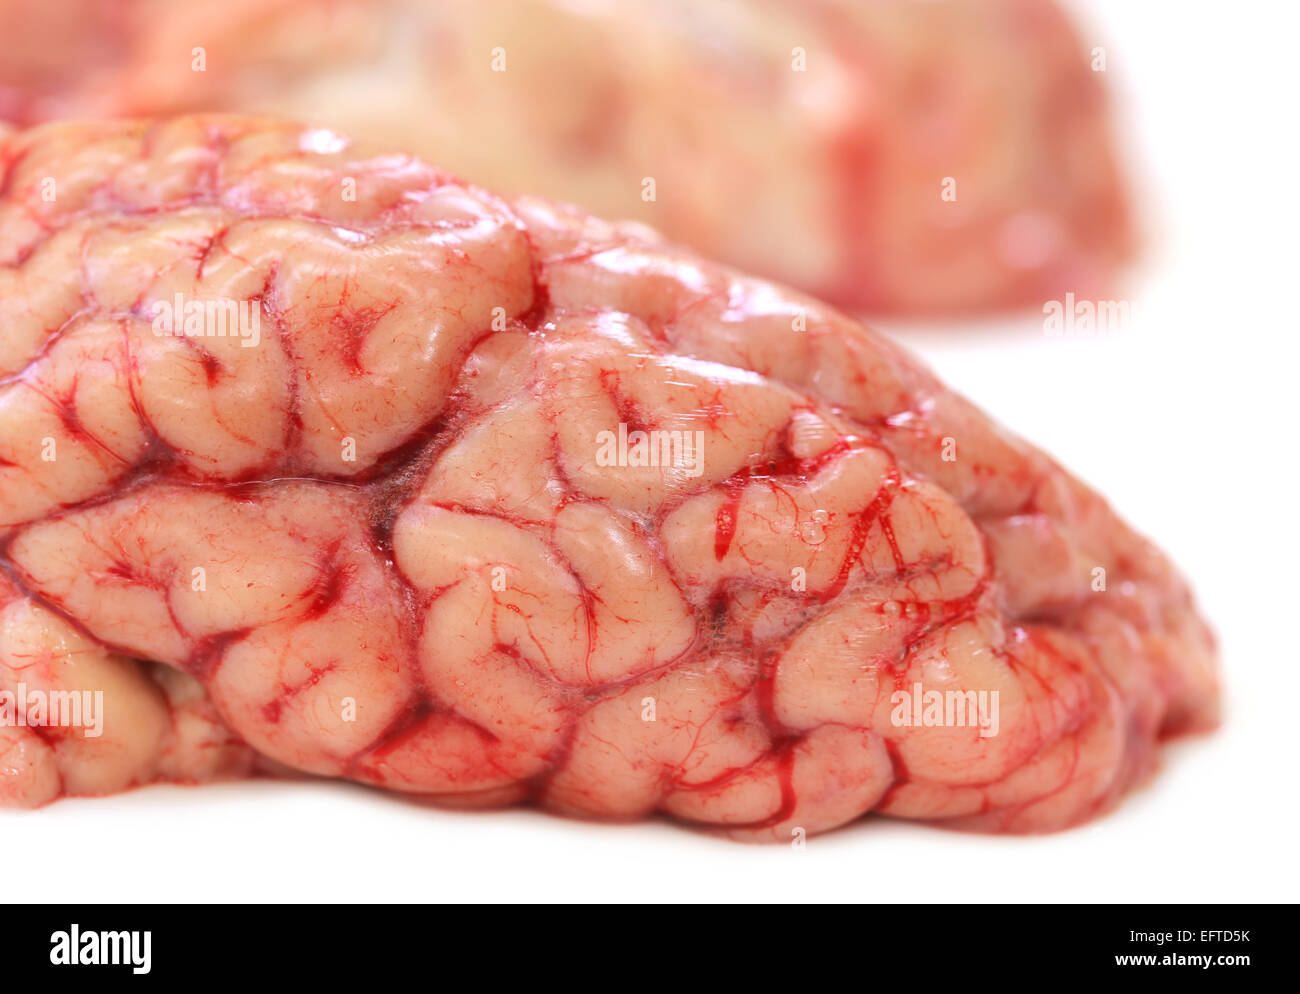 Brain of a cow over white background Stock Photo